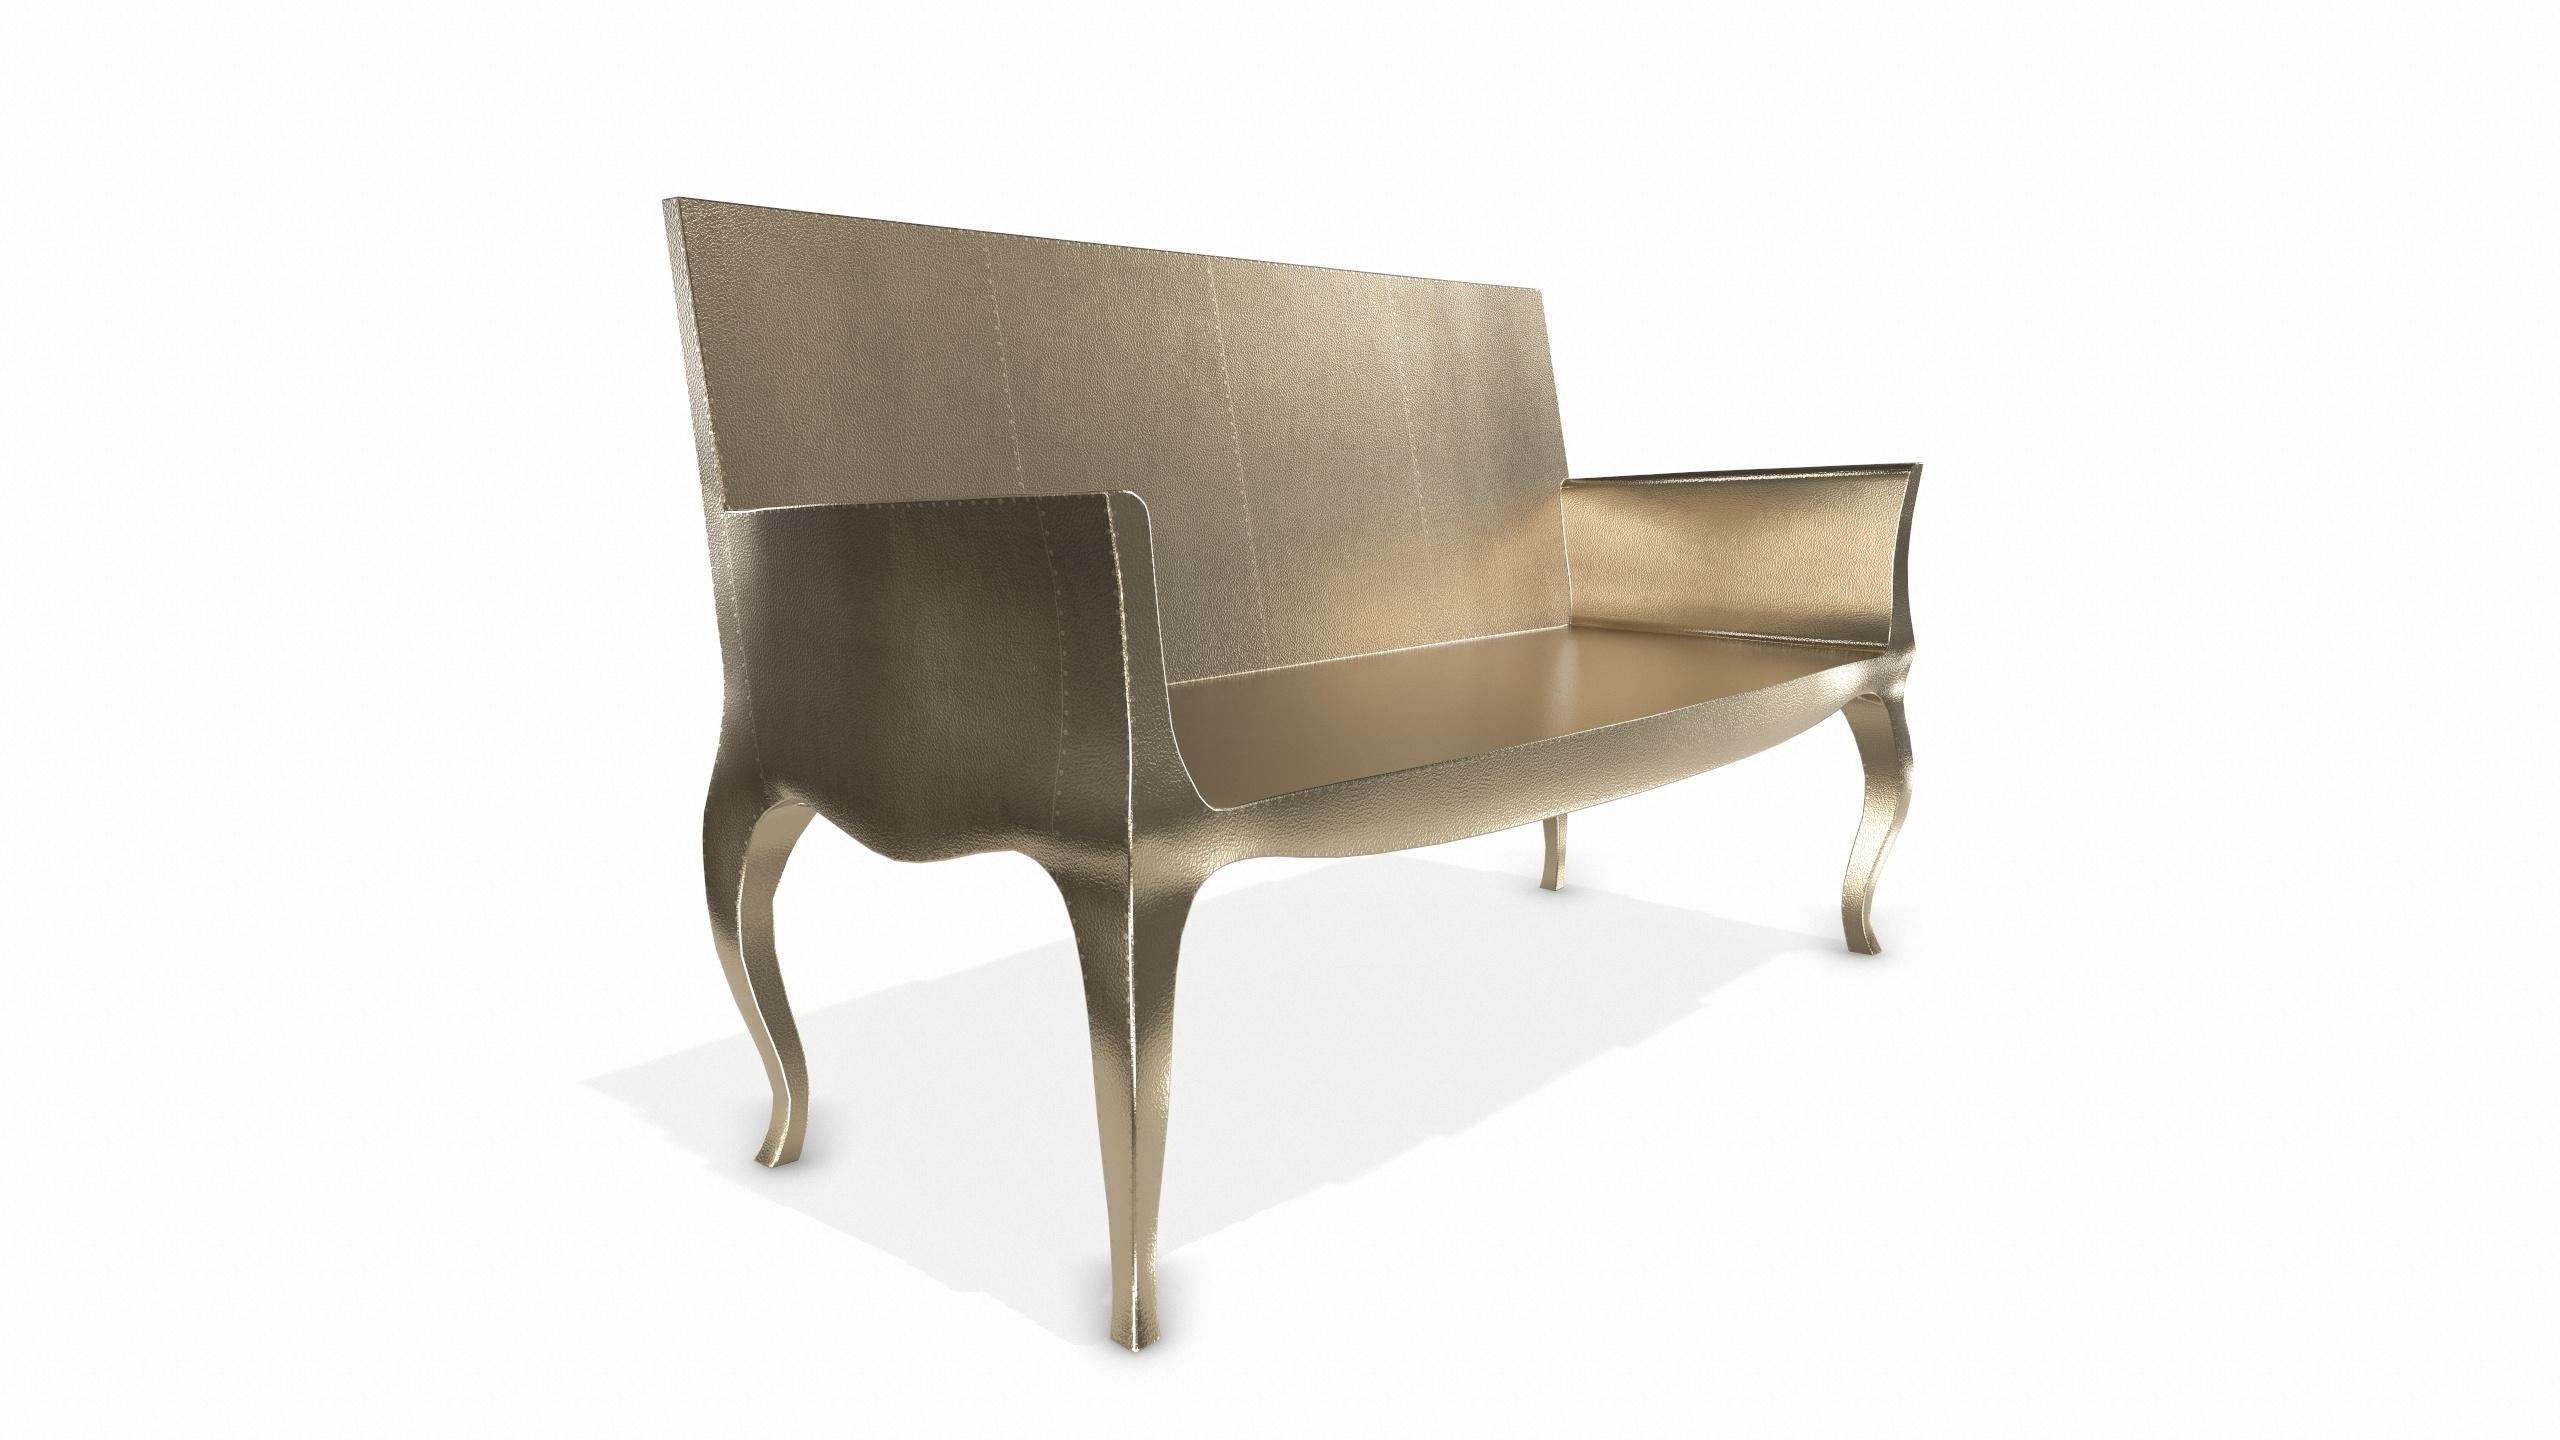 Louise Settee Art Deco Lounge Chairs in Fine Hammered Brass by Paul Mathieu In New Condition For Sale In New York, NY